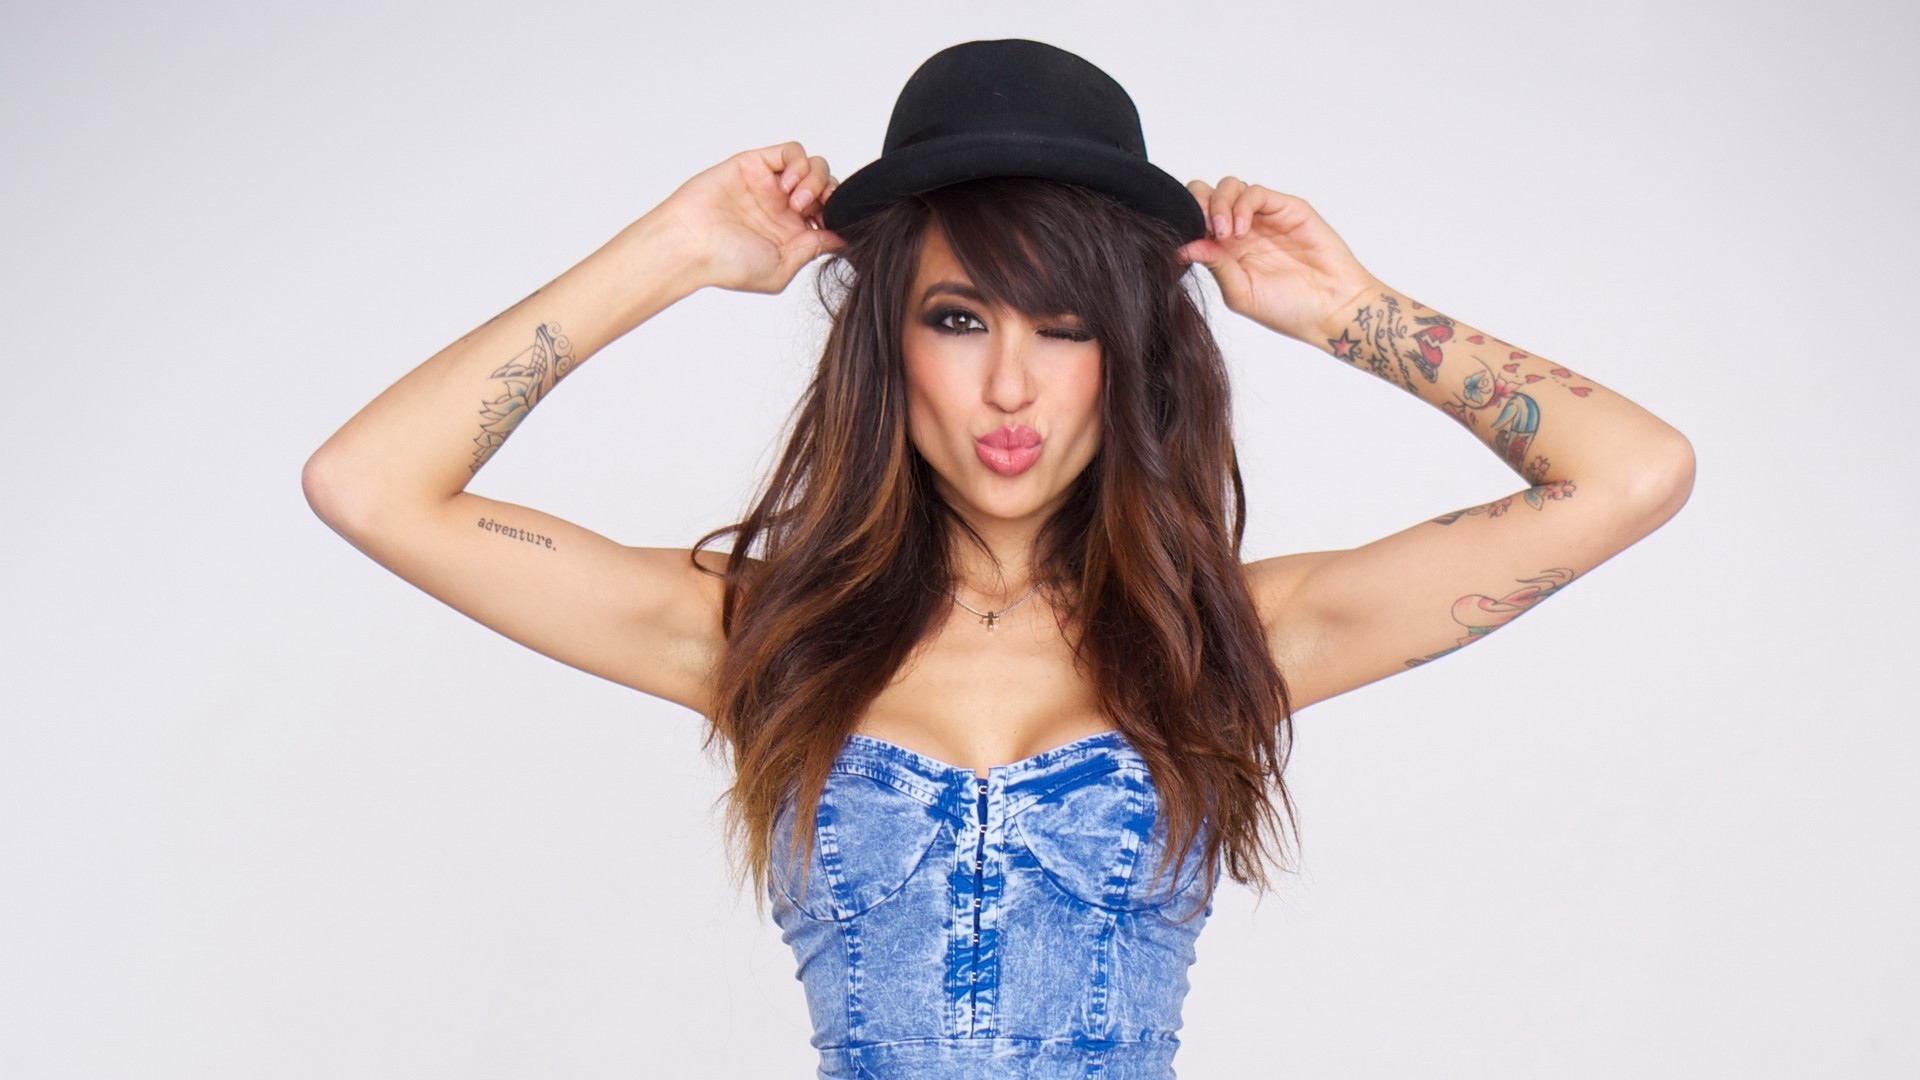 Girl in a black hat with a tattoo on hand